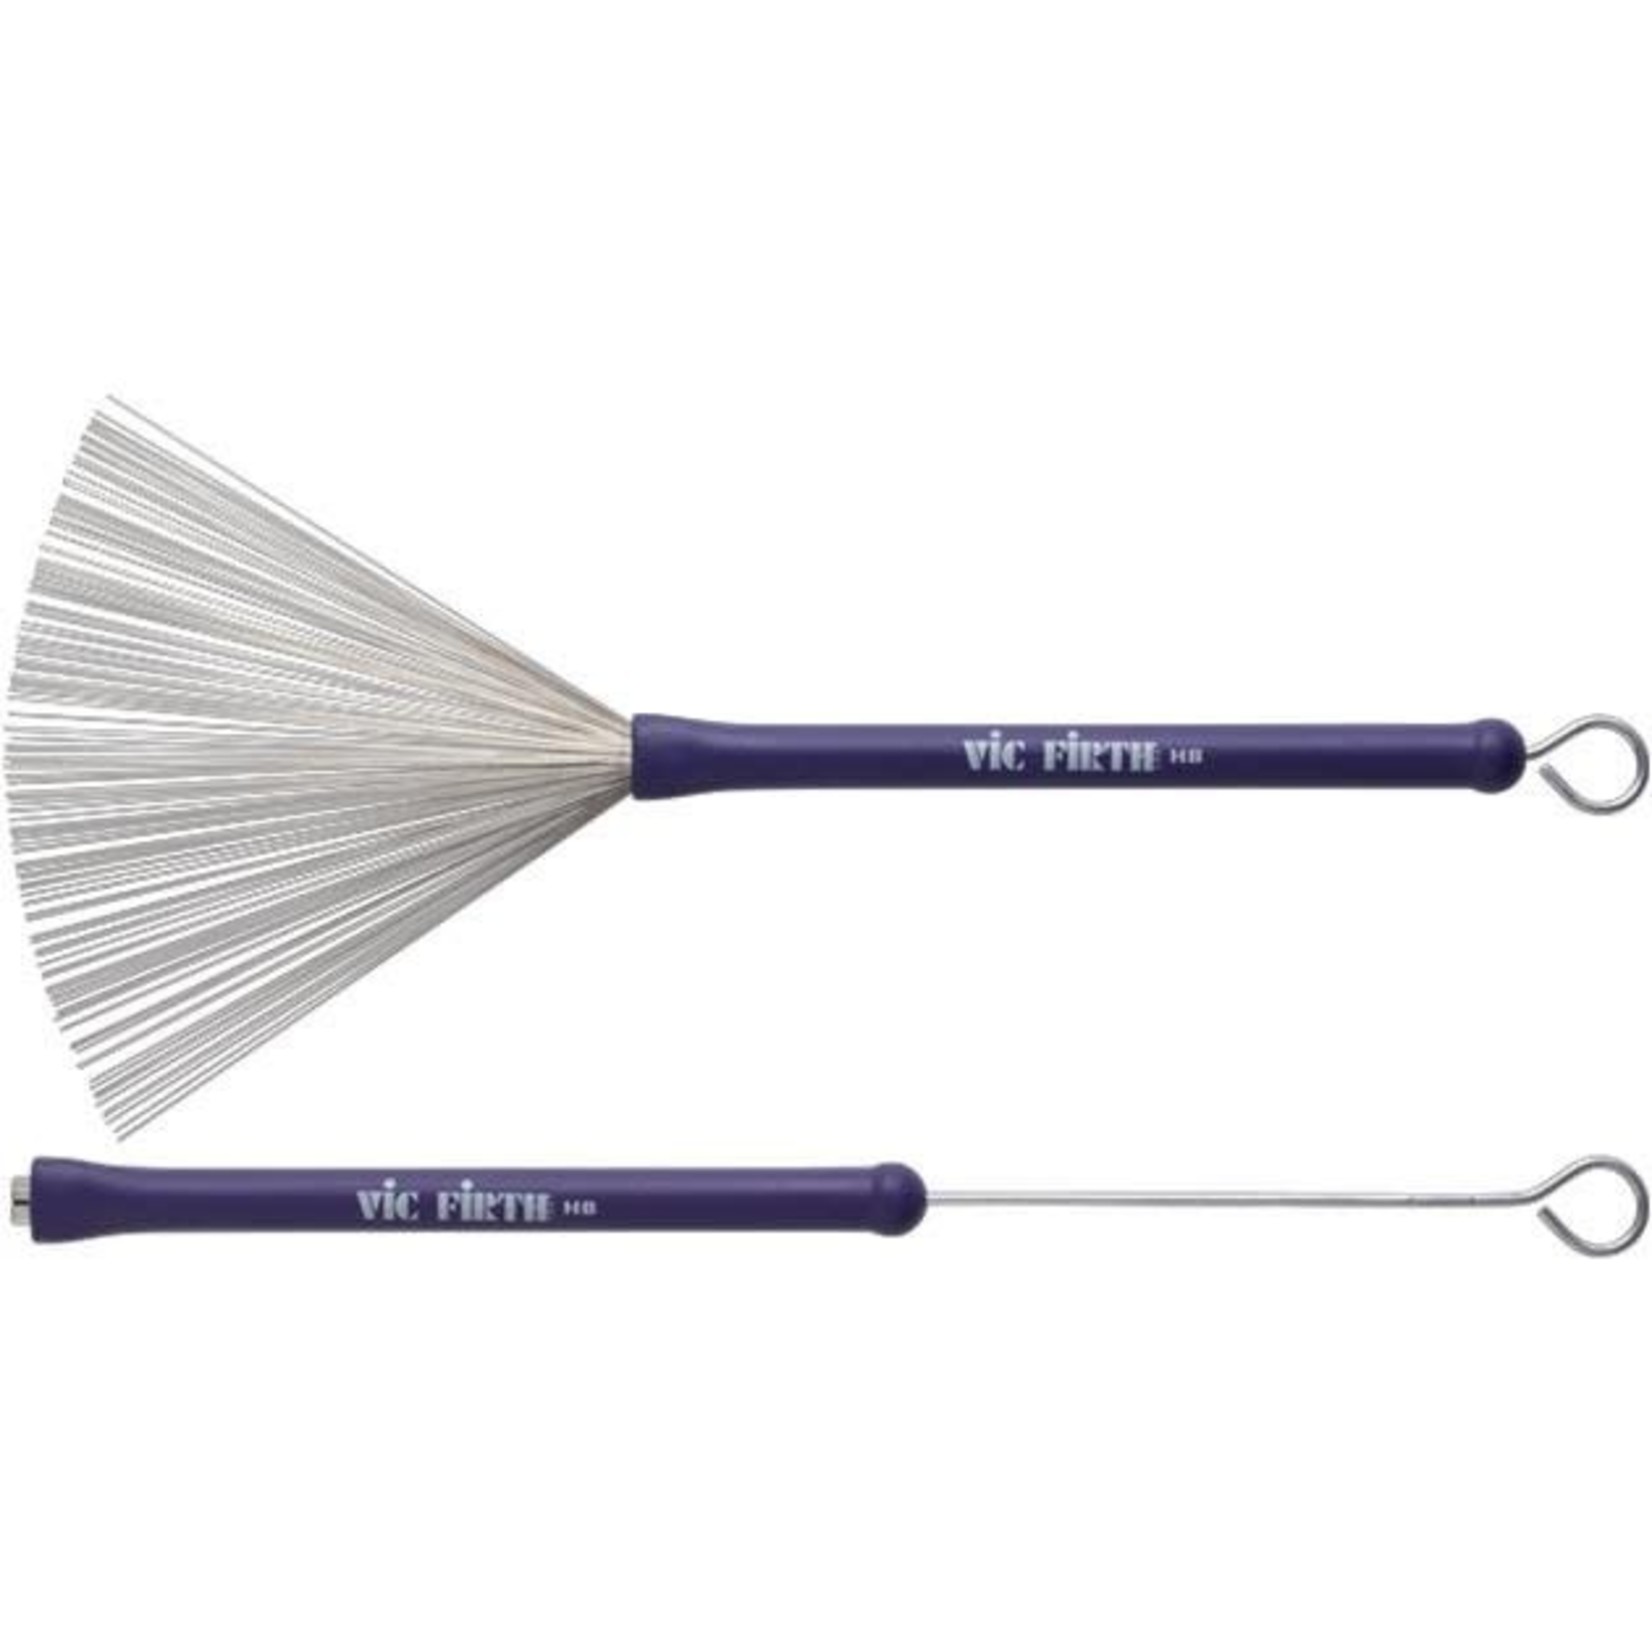 Vic Firth Vic Firth Heritage Brushes HB